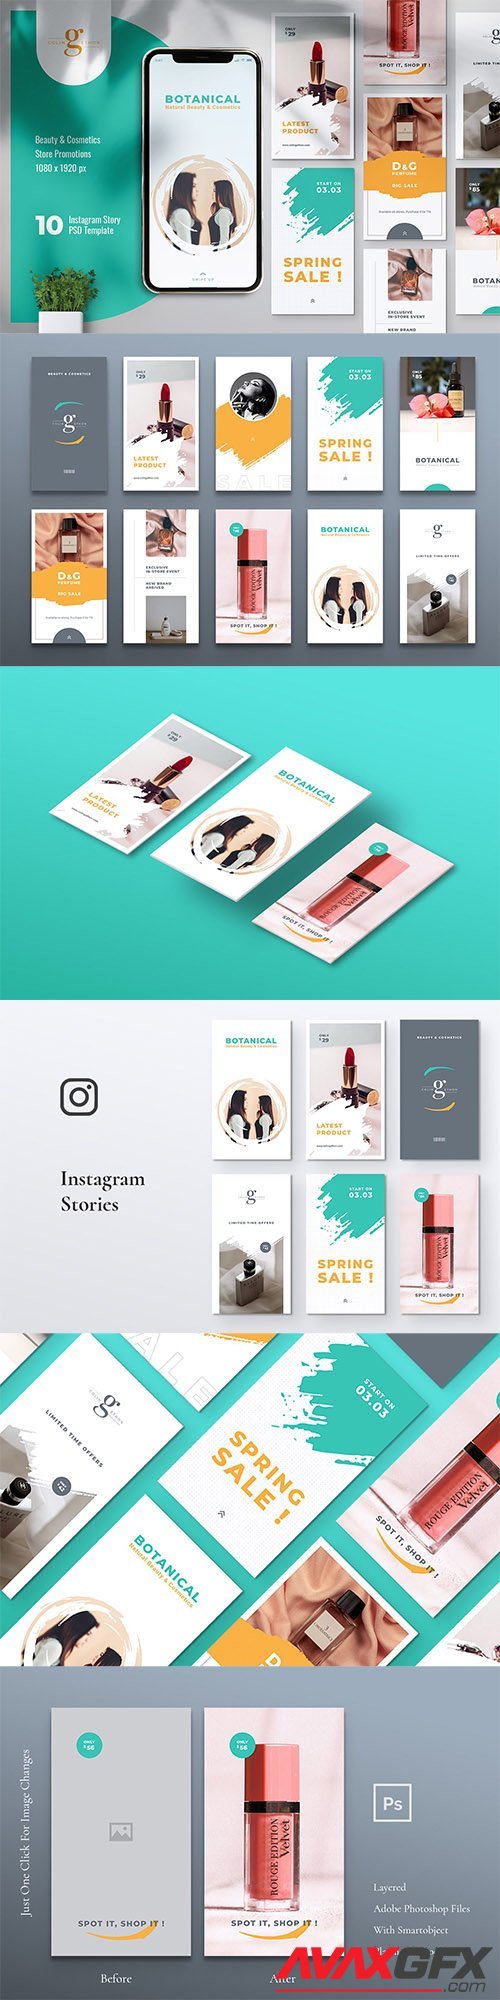 COLINGETHON Beauty & Cosmetic Instagram Stories, Pinterest Template, Puzzle Post